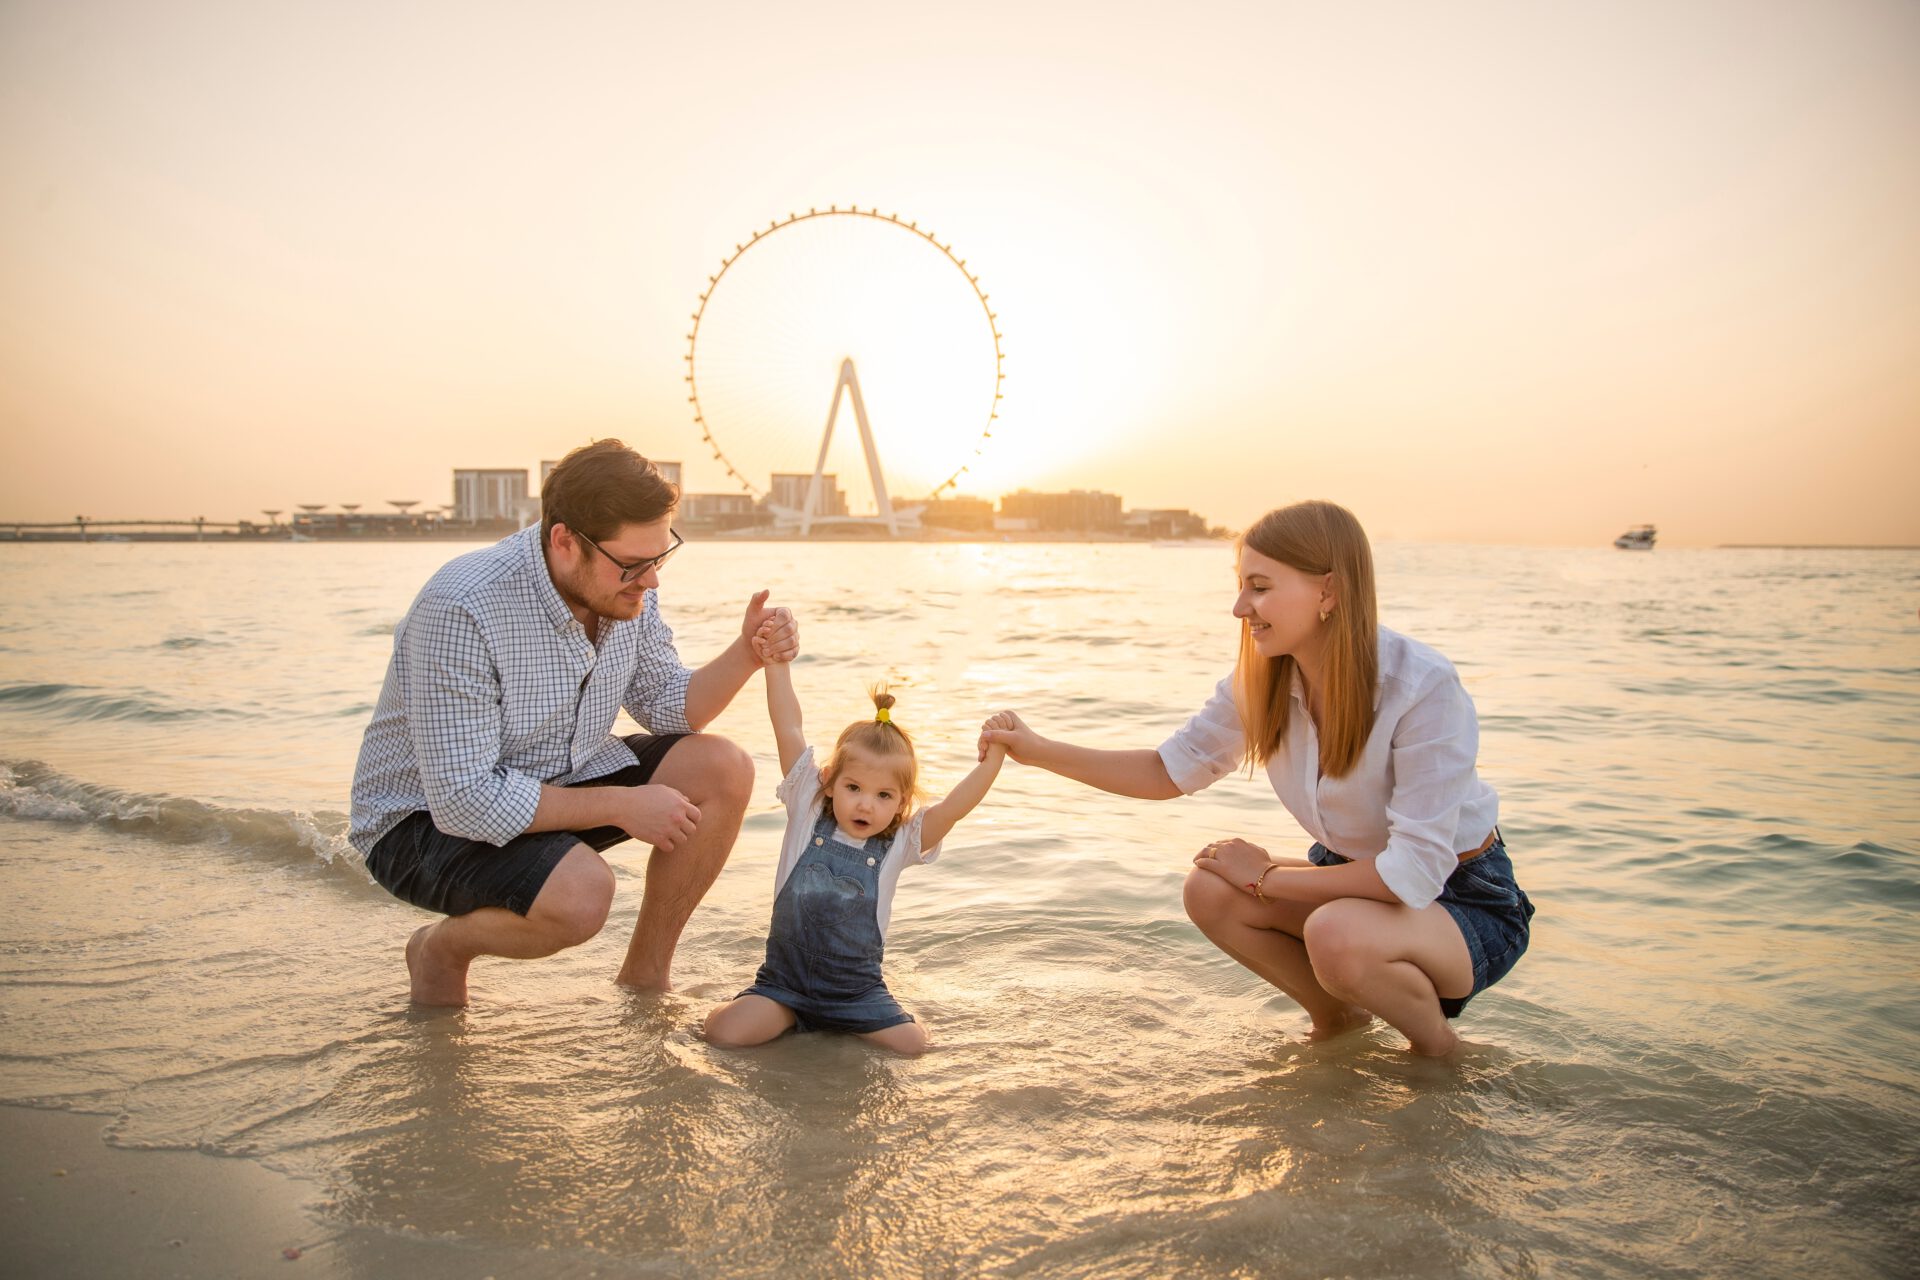 What to do in Dubai with kids - Family on Beach JBR